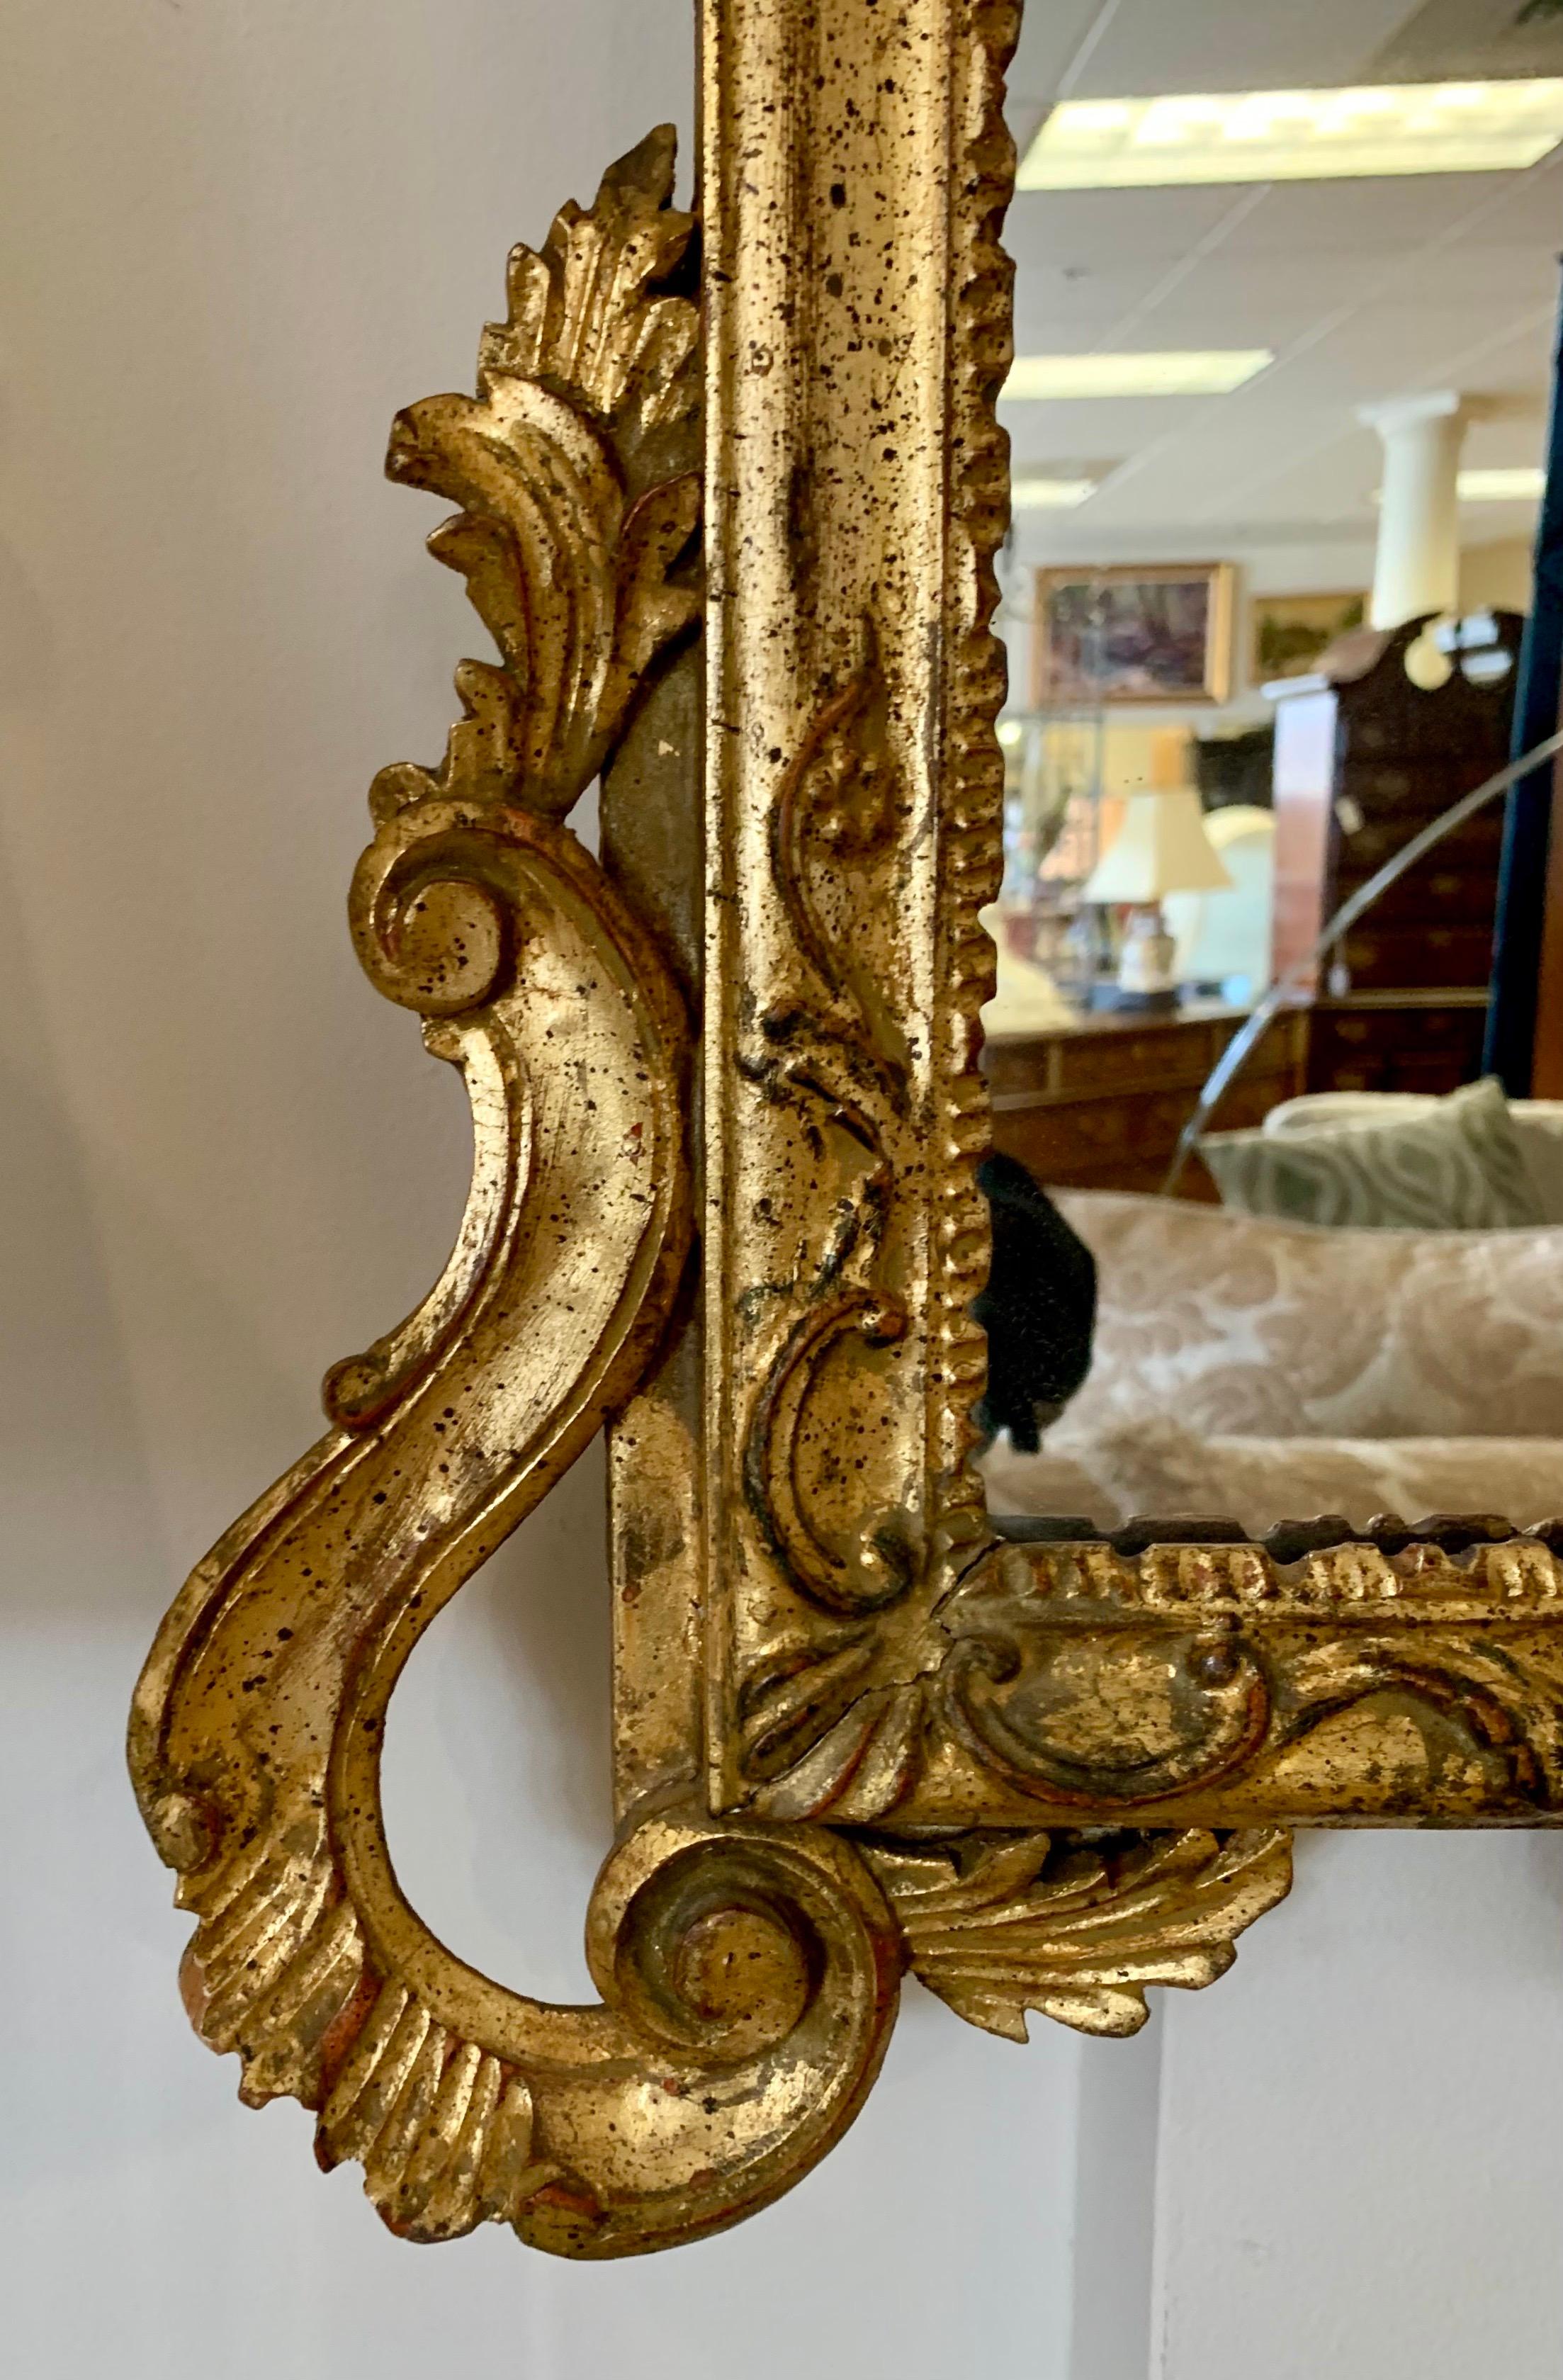 Carved and gilded shield shaped Rococo style Italian mirror with scrolls and acanthus leaf detail.